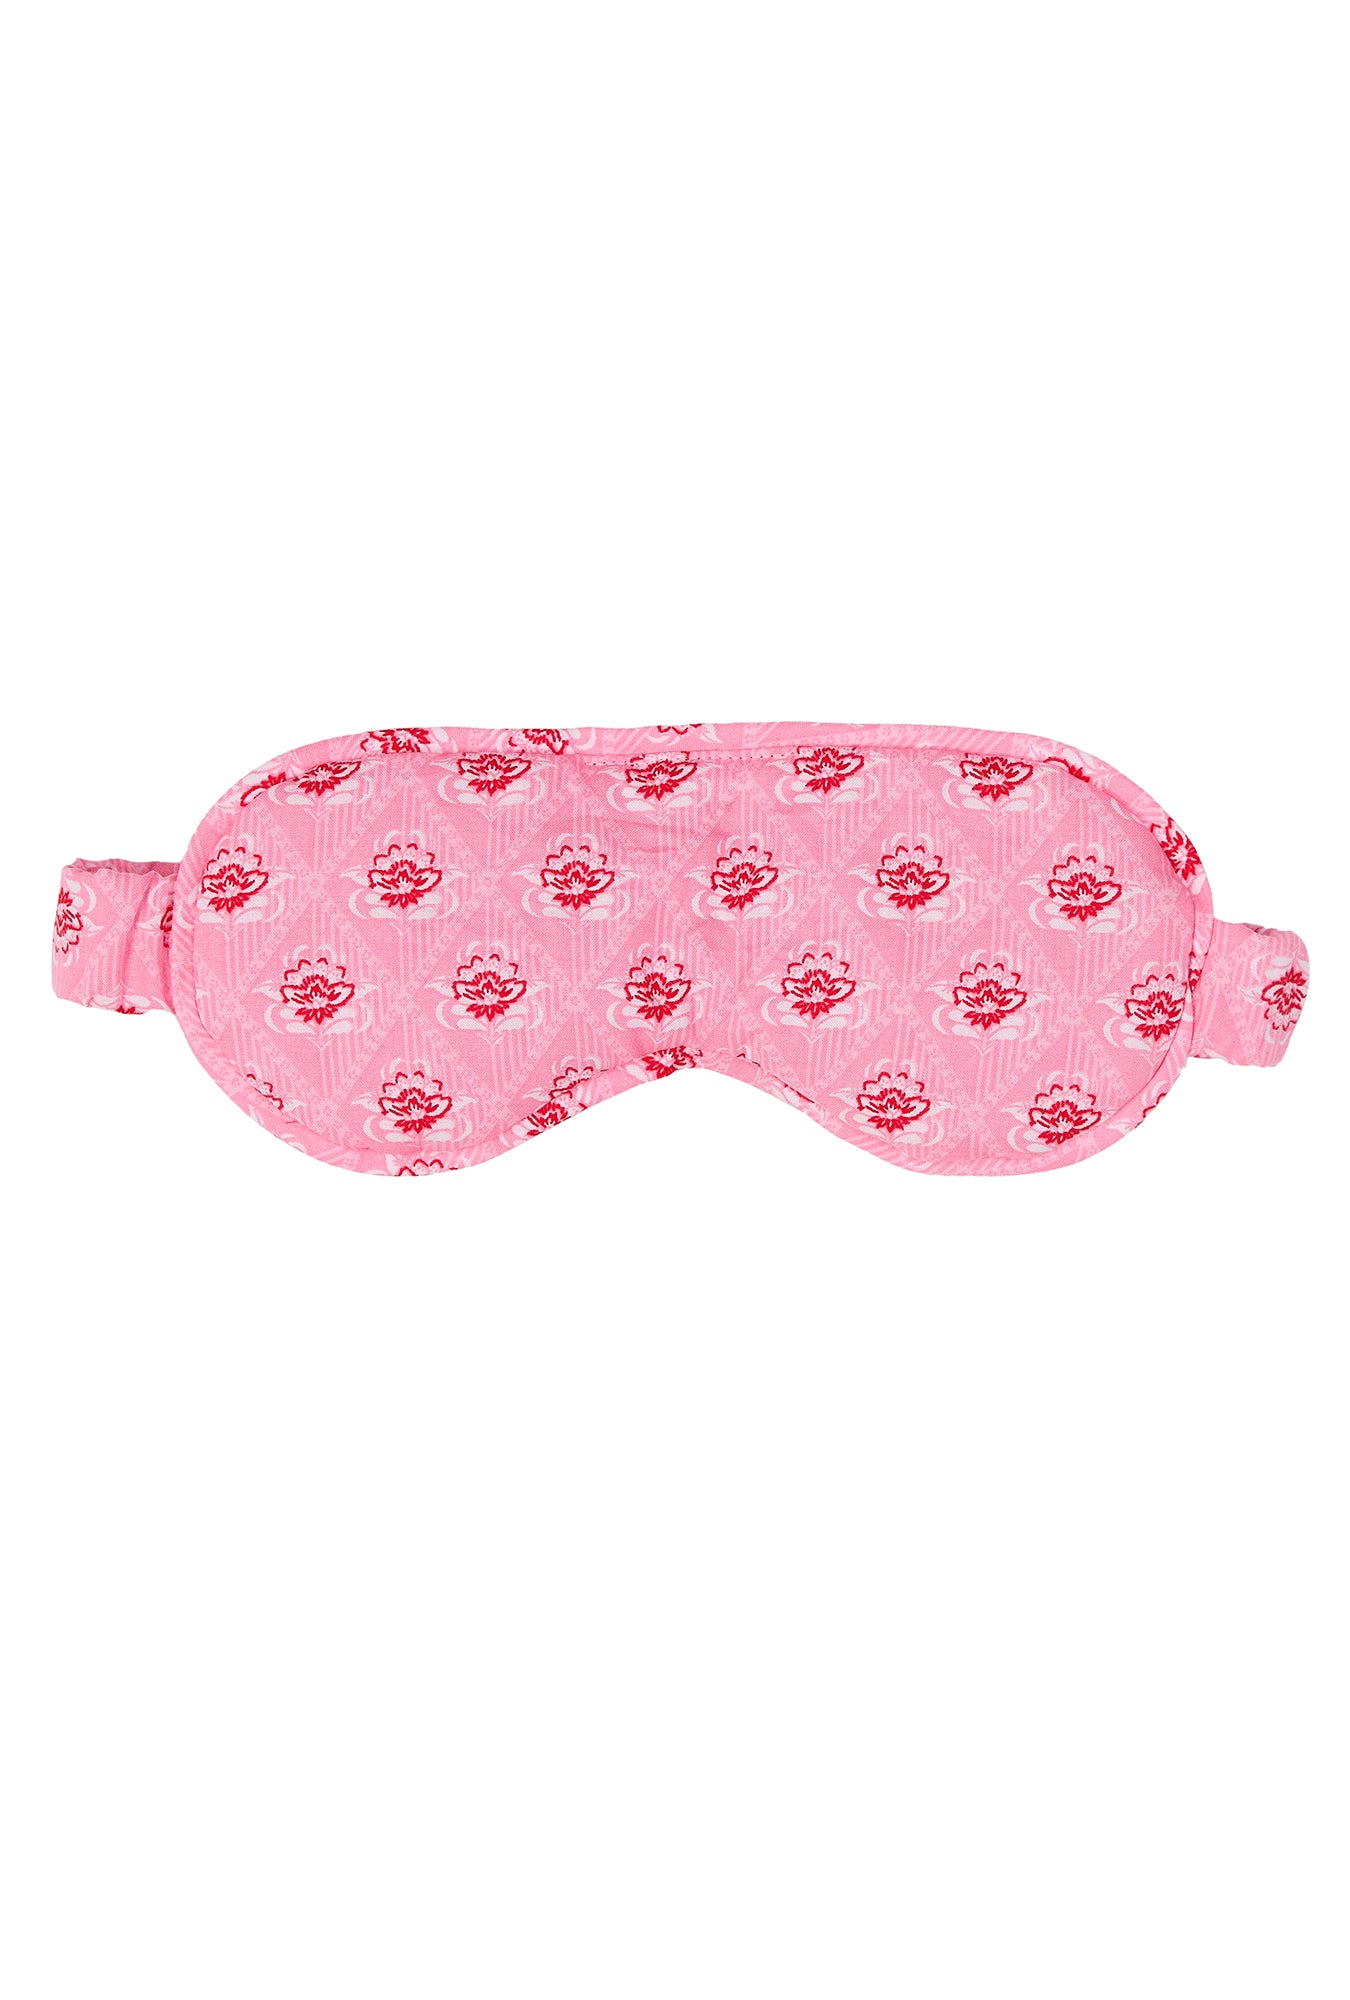 A lady wearing pink sleep mask with corsage print